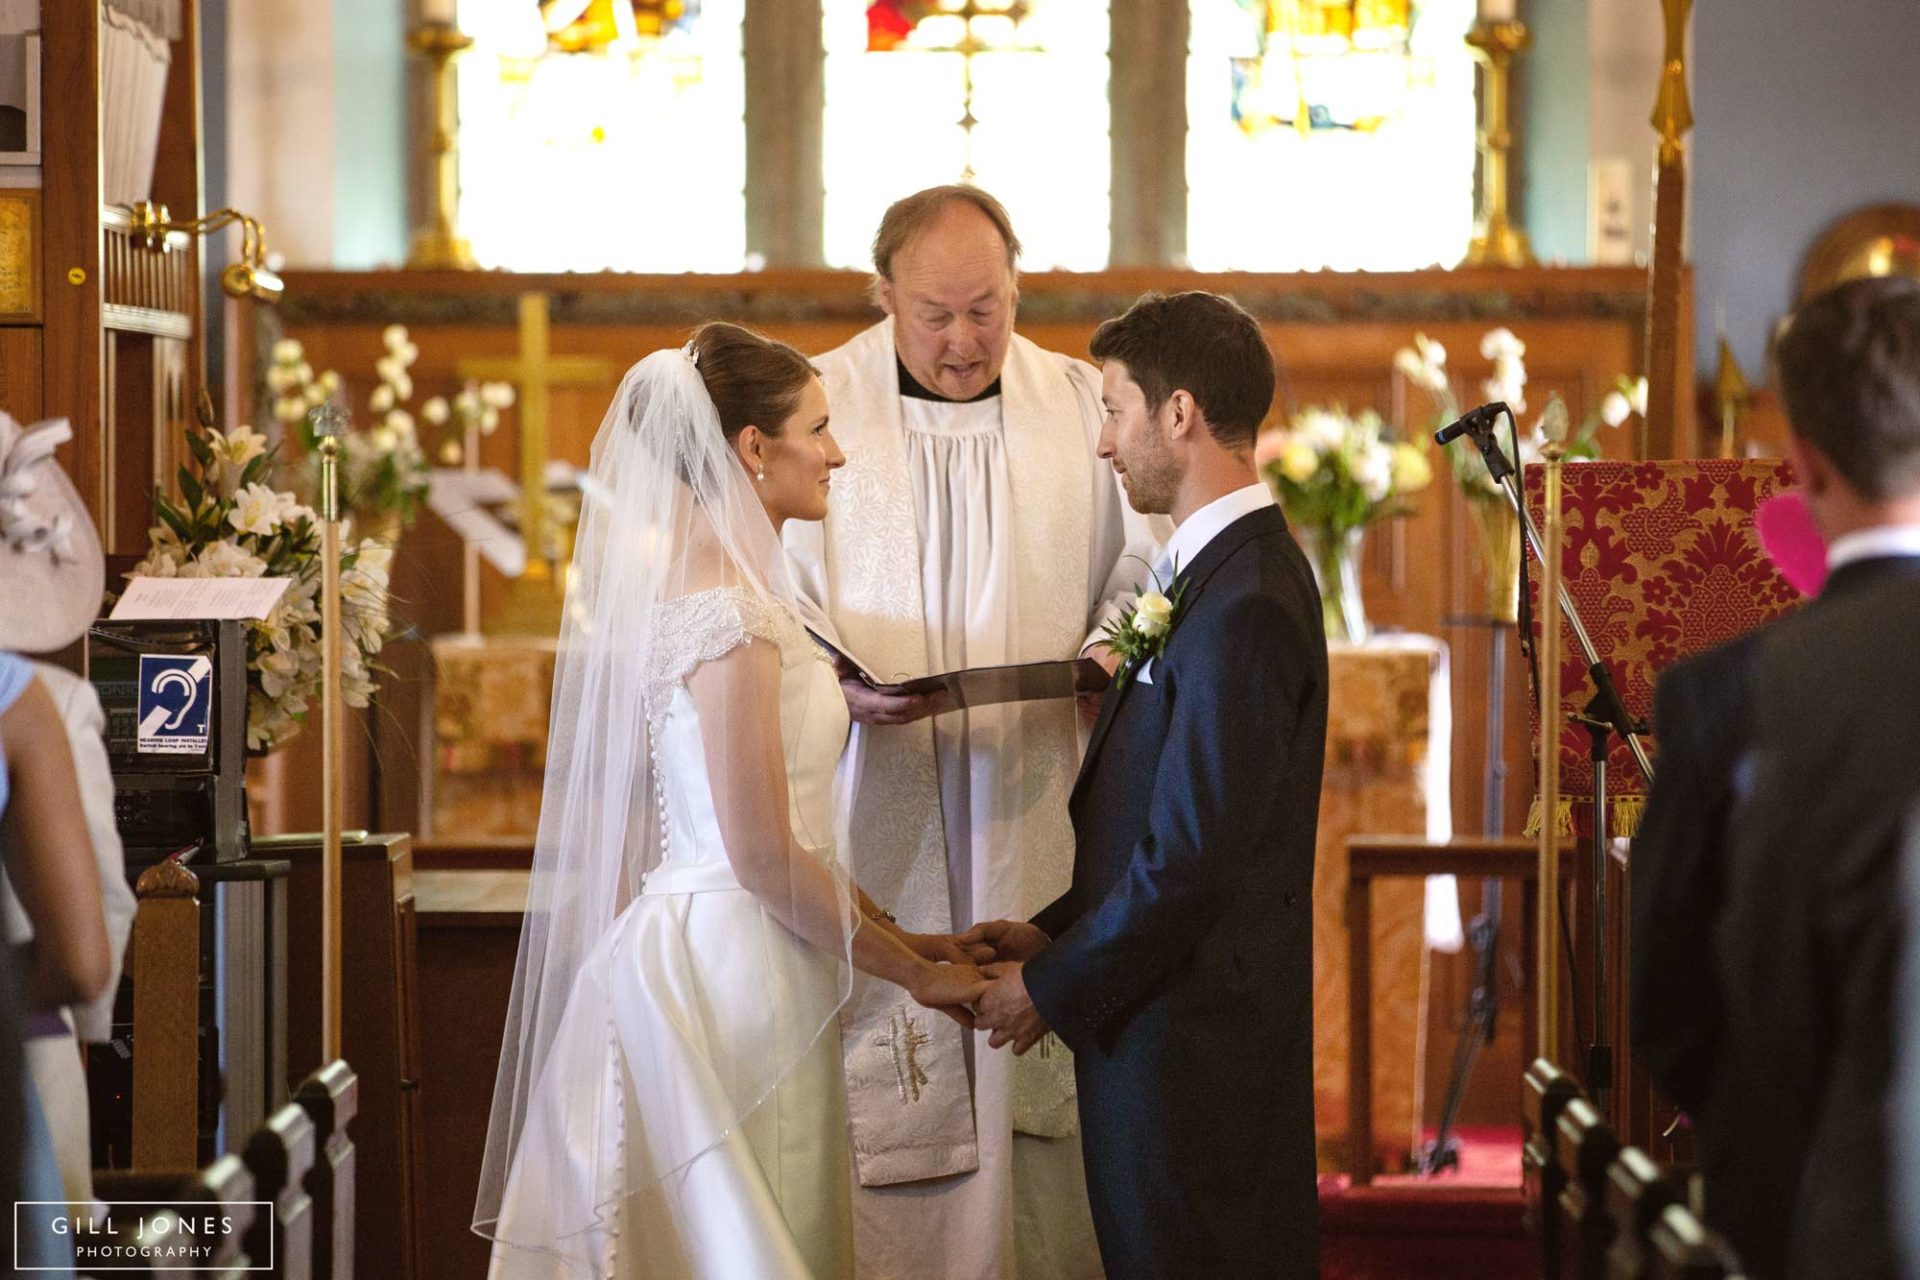 the bride and groom facing each other at the altar